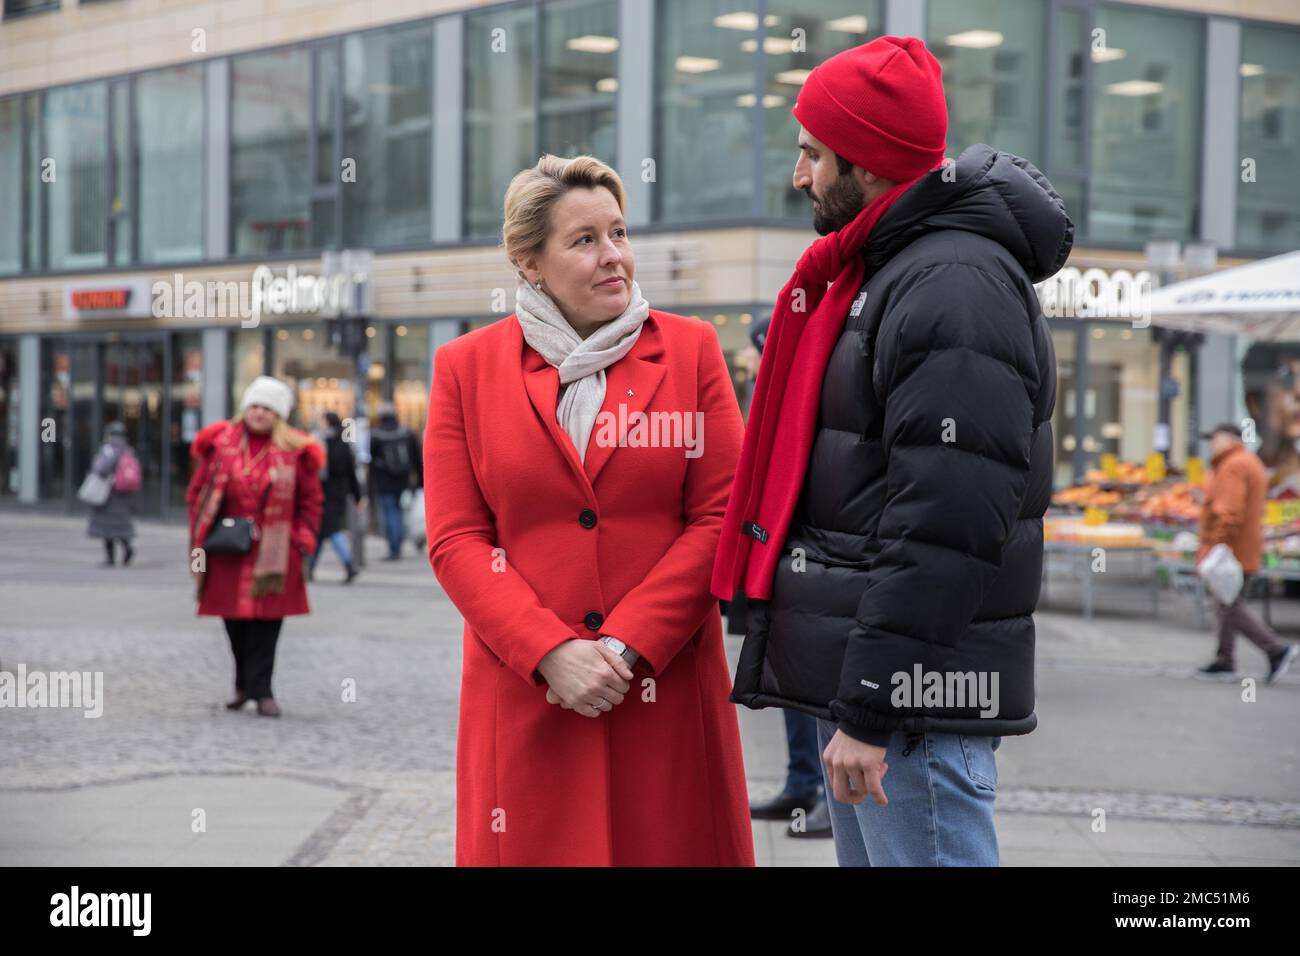 On January 21, 2023, the Governing Mayor of Berlin, Franziska Giffey, paid a visit to an election booth of the SPD (Social Democratic Party of Germany) in the city. The visit was part of the ongoing campaign for the 2023 Berlin repeat state election. Giffey, also an SPD member, took advantage of speaking with party members and supporters operating the booth. She also took the opportunity to meet with residents and listen to their concerns. She emphasized the importance of the SPD's commitment to social justice and fair economic policies, as well as its commitment to working toward a more susta Stock Photo